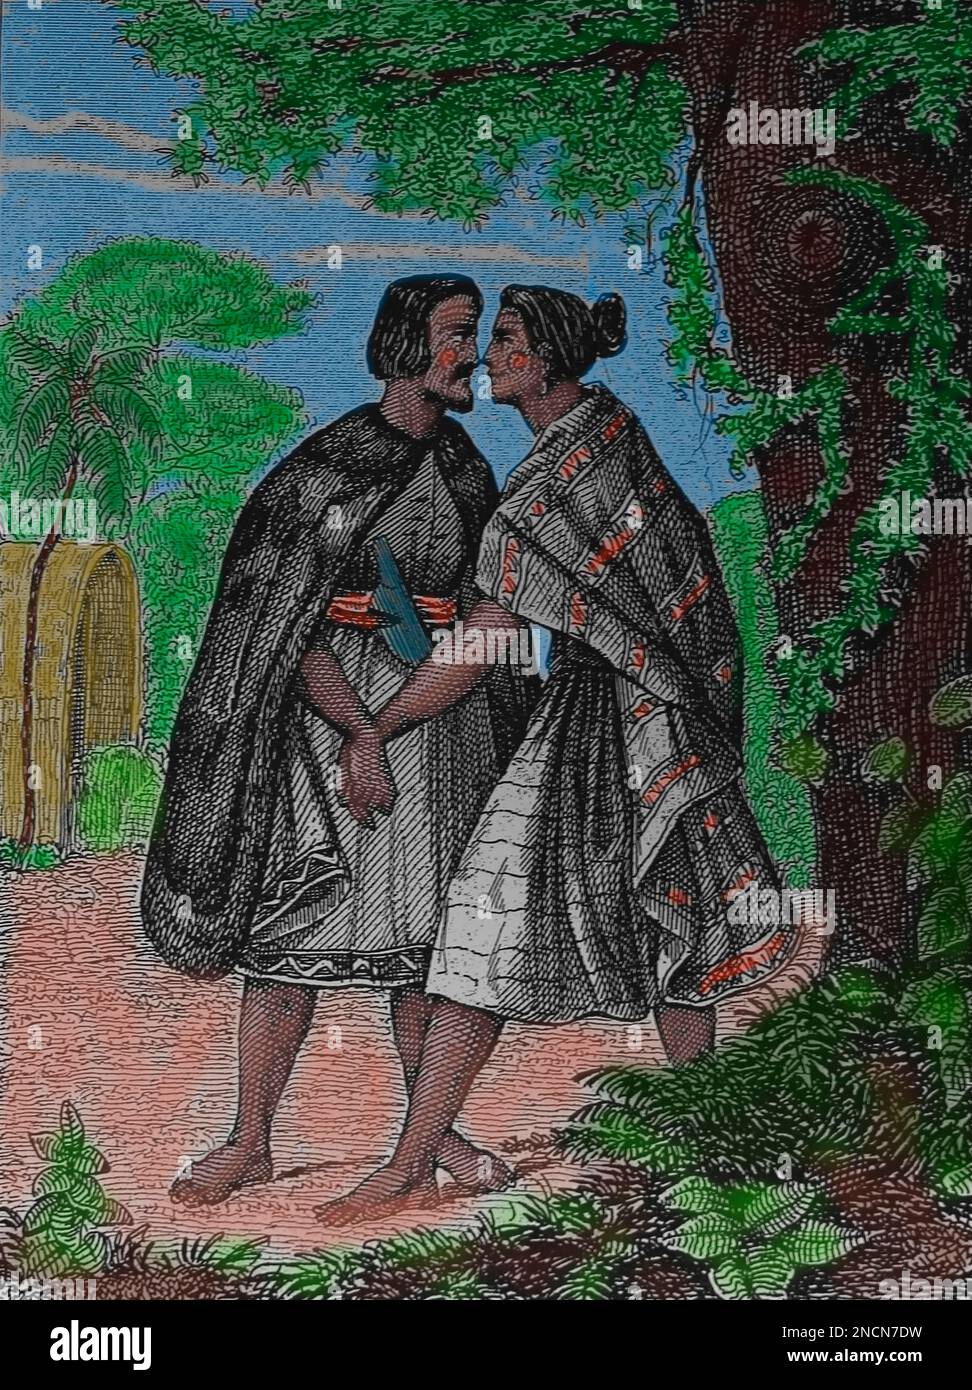 New Zealand. The traditional Maori greeting, the hongi. Pressing noses. Engraving. 19th century. Stock Photo